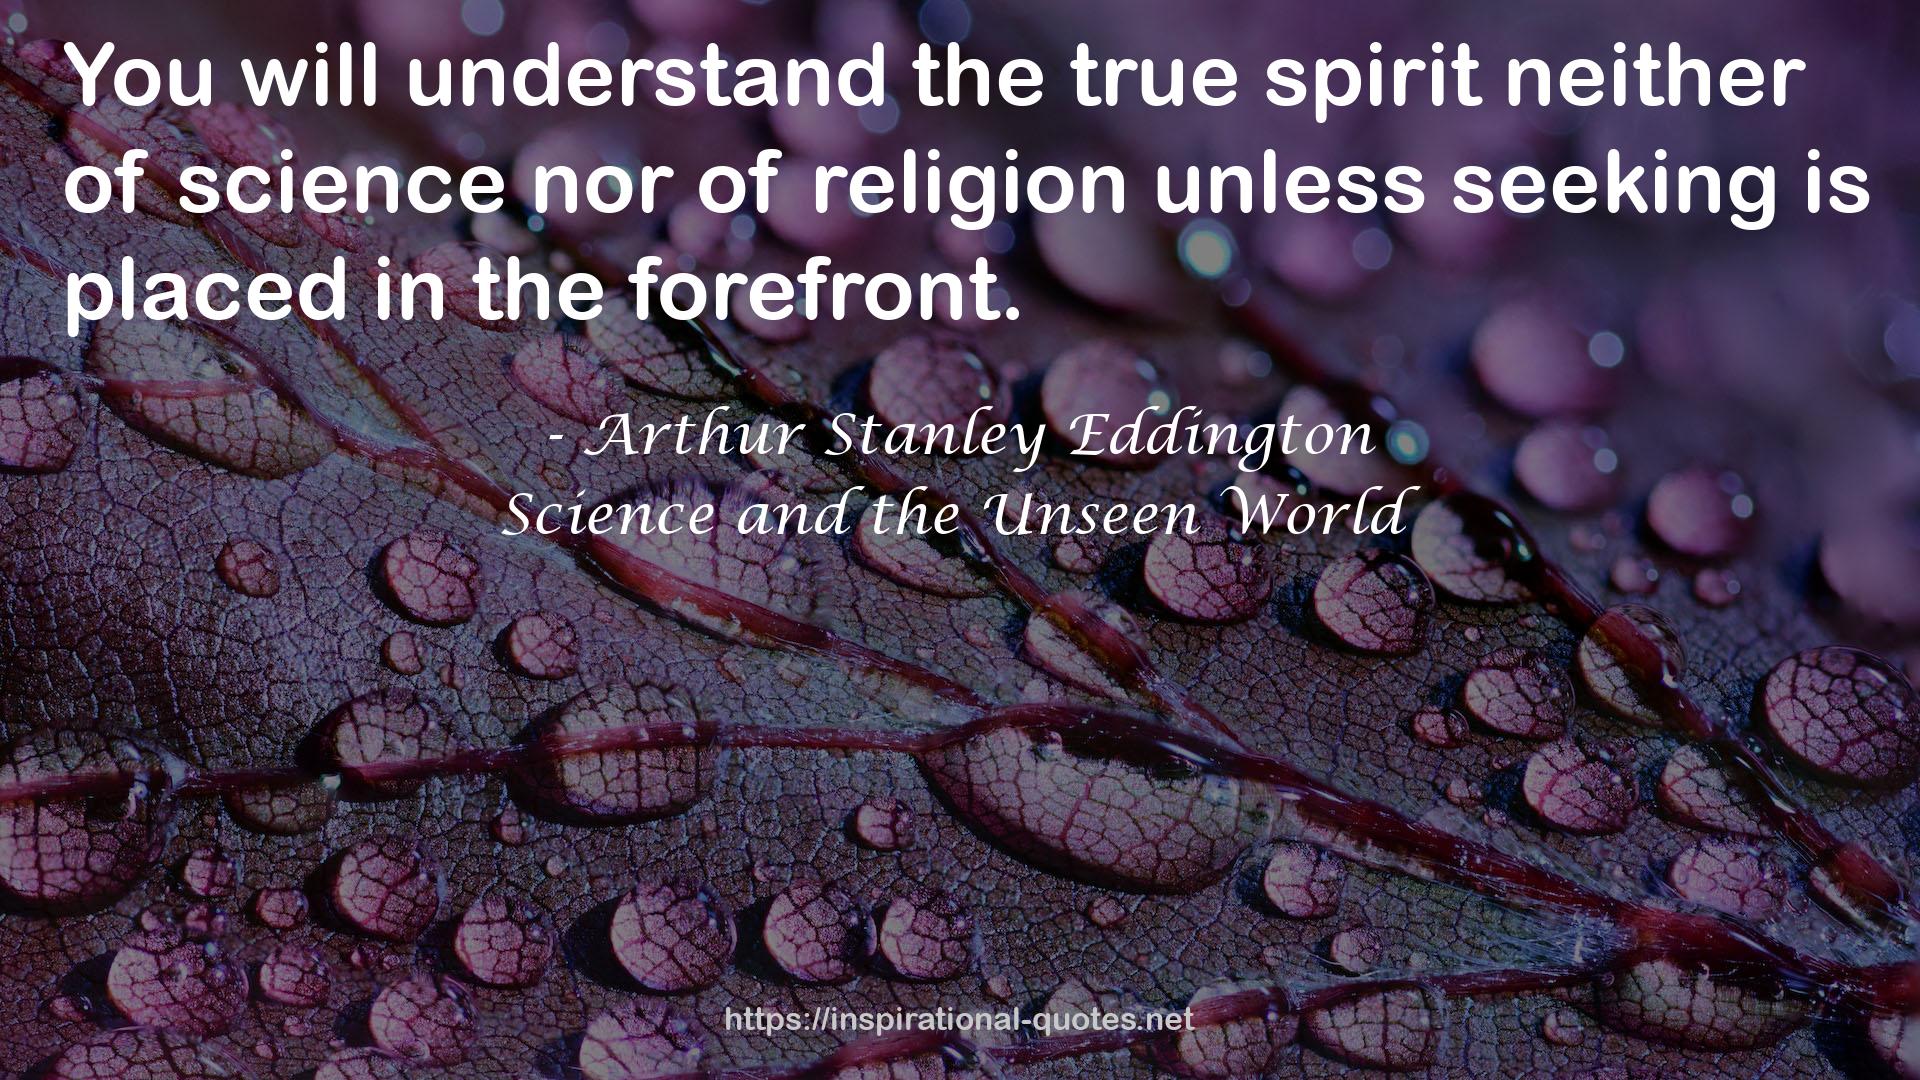 Science and the Unseen World QUOTES